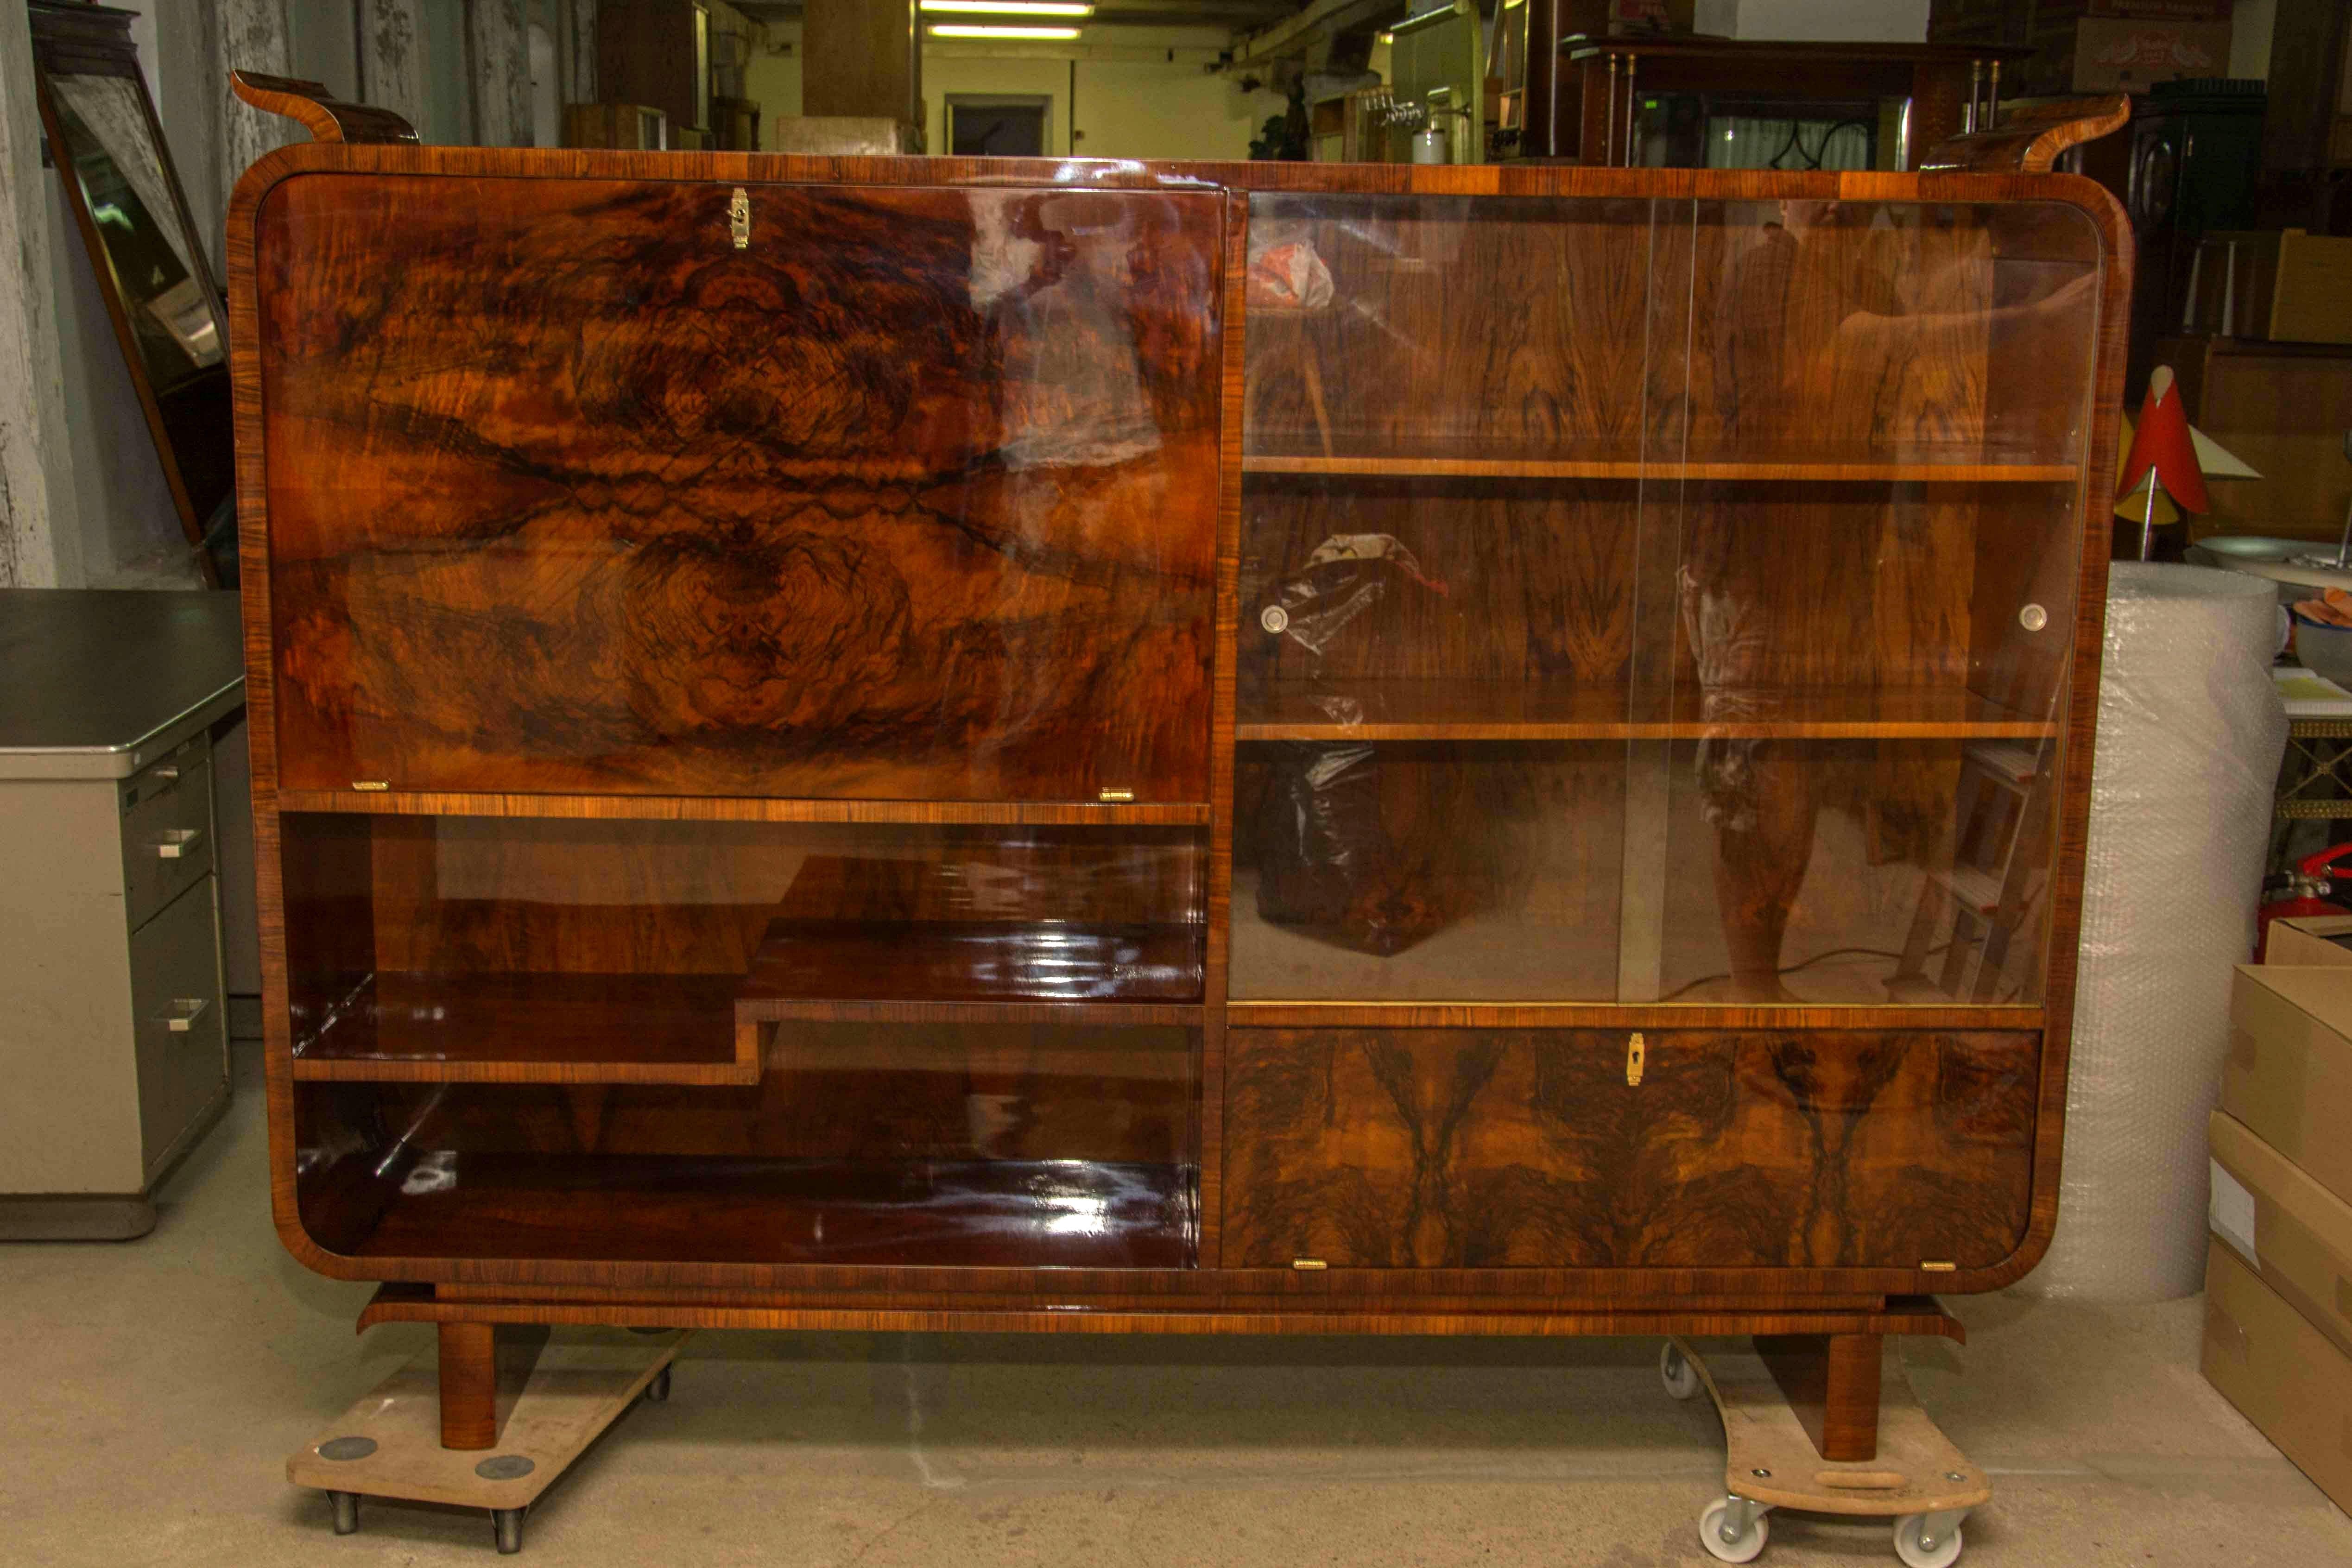 This walnut library cabinet / bookcase Art Deco was designed and produced in the 1930s in Bohemia. The upper part of unit consists of a glazed space on the left with a bar on the right. The lower part consists of a storage space, closed and opened.